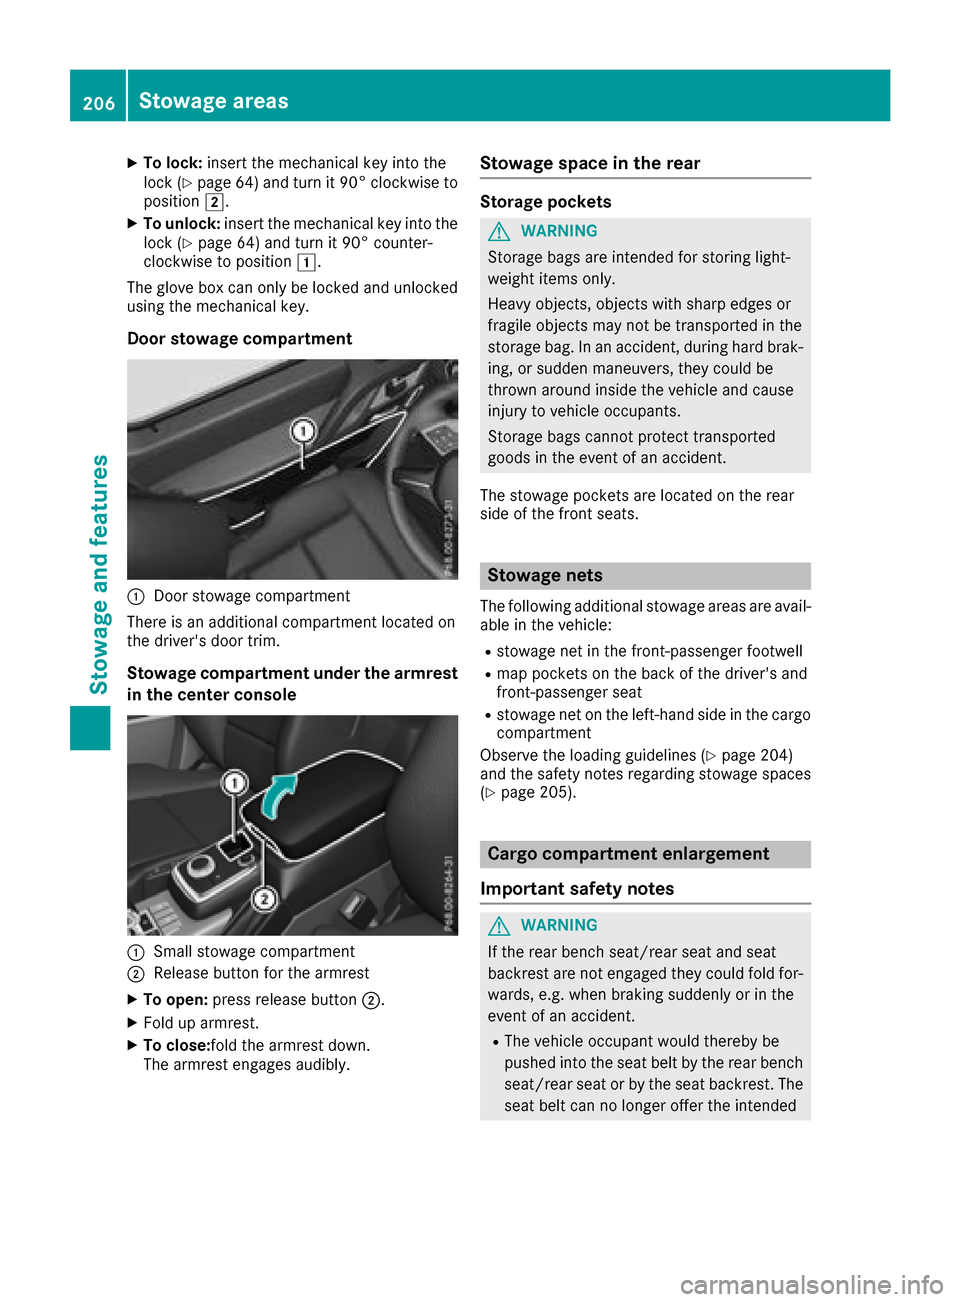 MERCEDES-BENZ G-Class 2017 W463 Owners Manual XTo lock:insert the mechanical key into the
lock (Ypage 64) and turn it 90° clockwise to
position 2.
XTo unlock: insert the mechanical key into the
lock (Ypage 64 )and turn it 90° counter-
clockwise